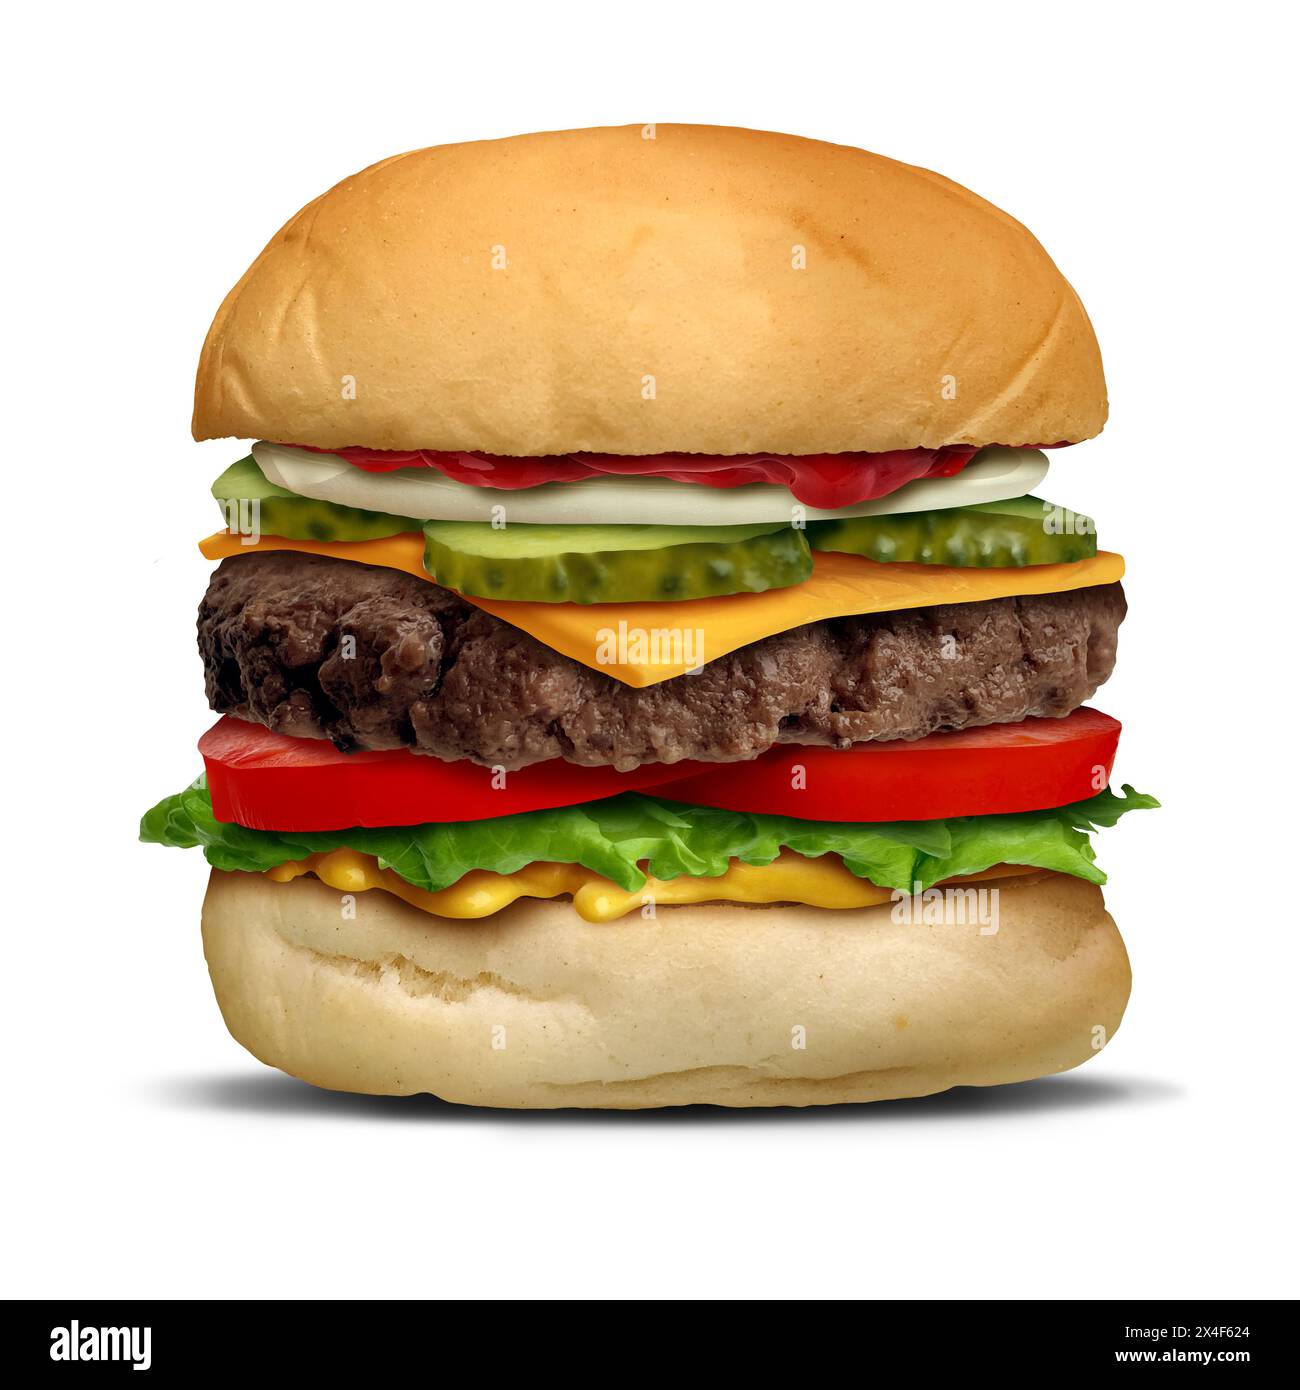 Perfect Hamburger as an American Burger all dressed with fresh toppings ingredients assembled for a perfect classic hamburger with a meat patty. Stock Photo